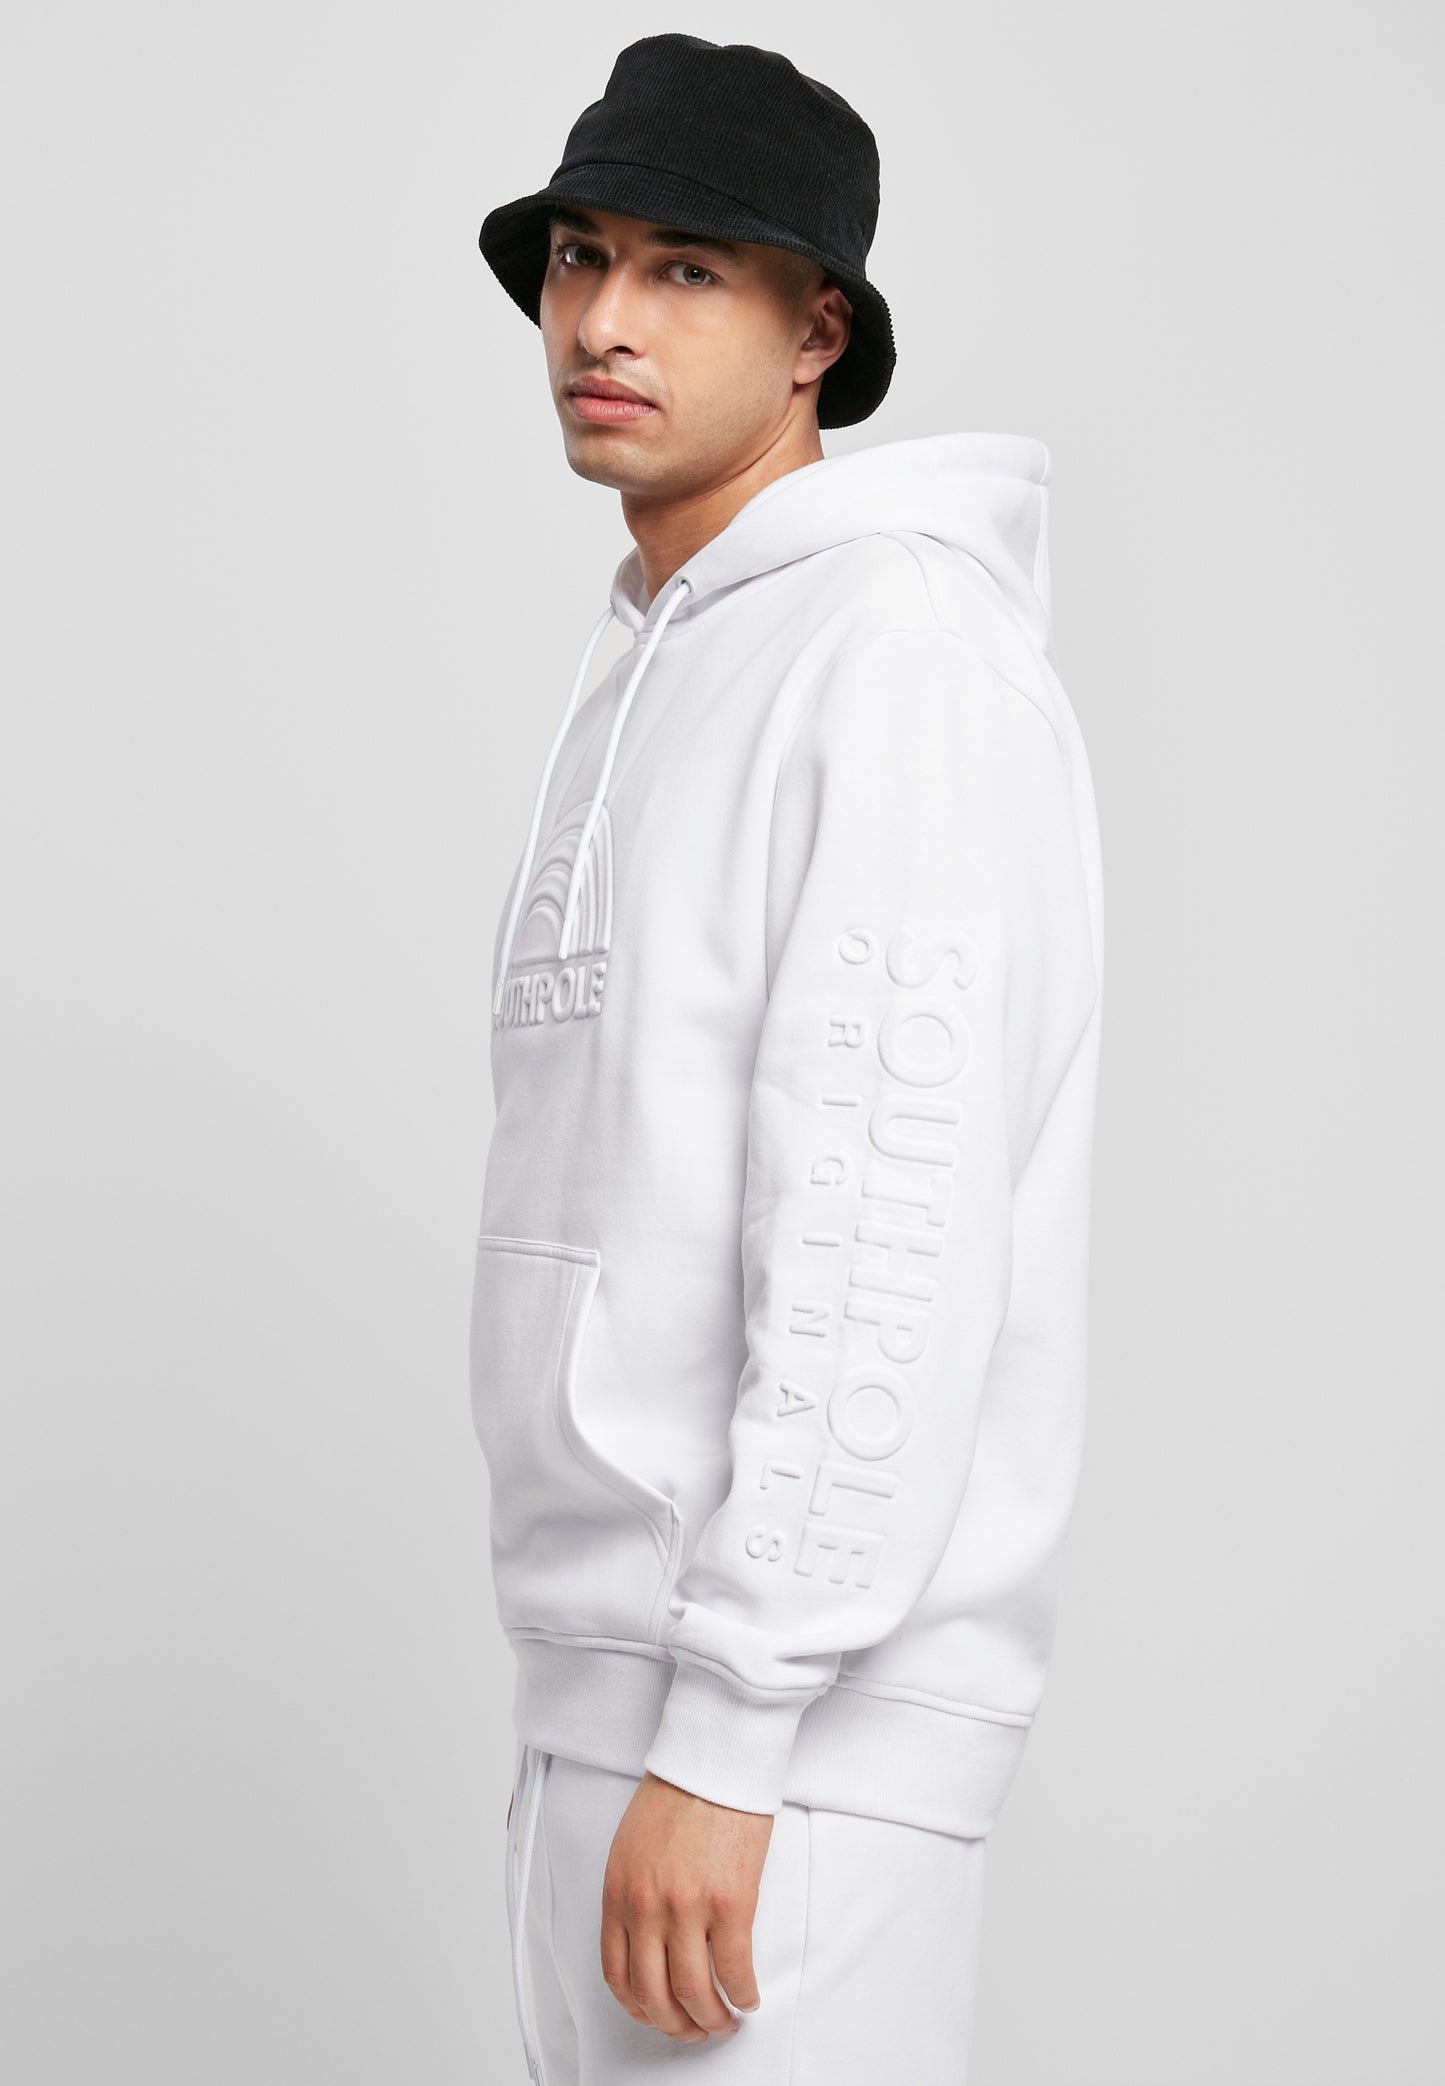 Southpole 3D Print Hoody in Weiß